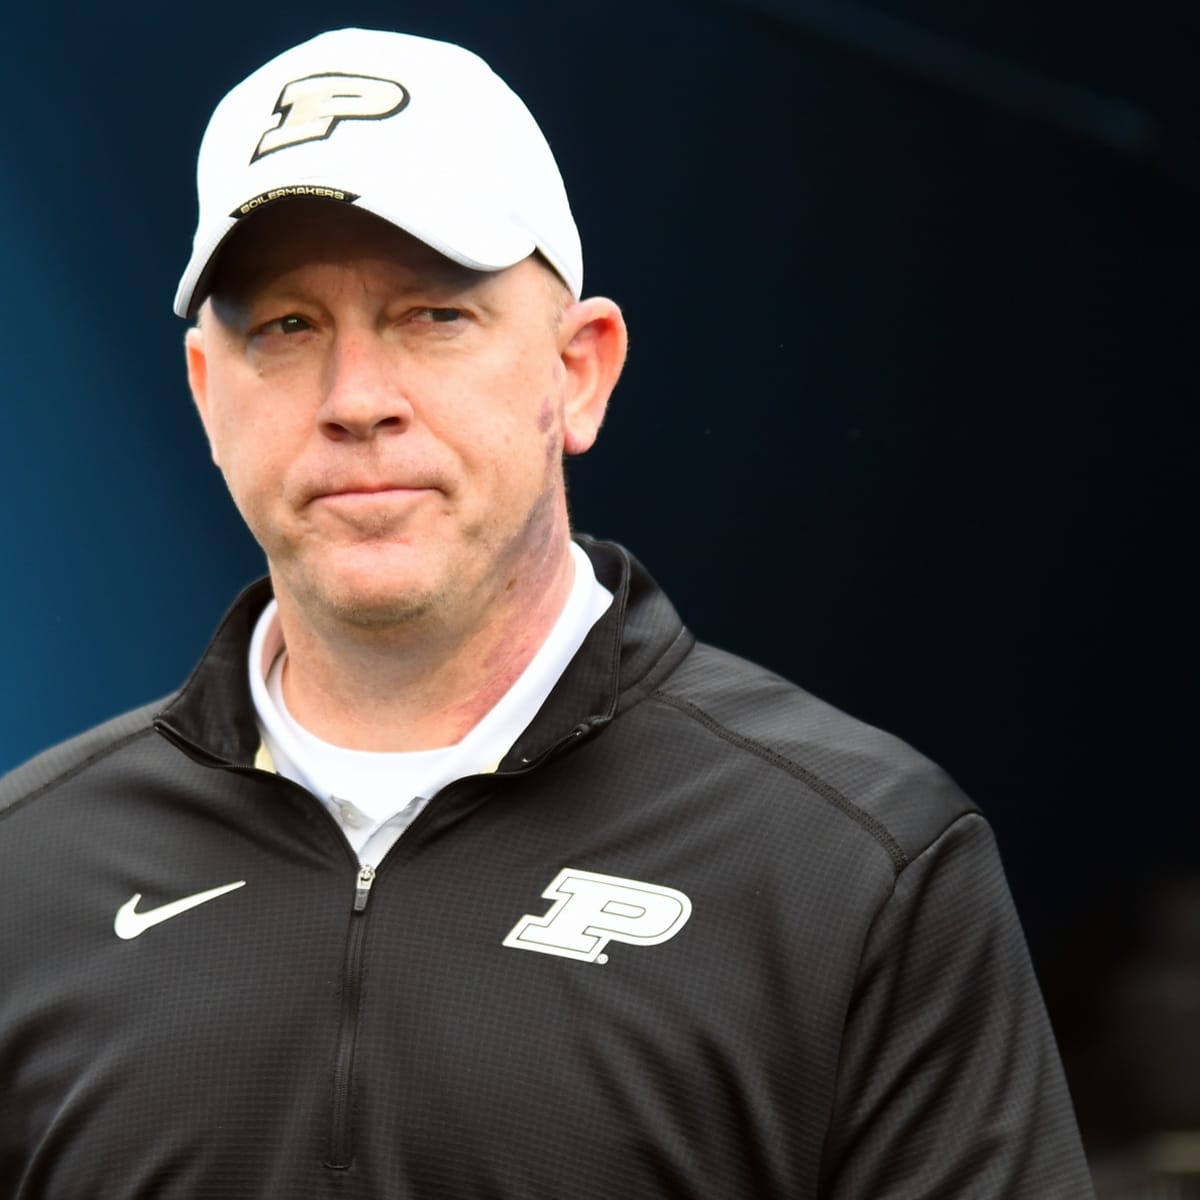 My heart is here': UofL announces Jeff Brohm as next head football coach